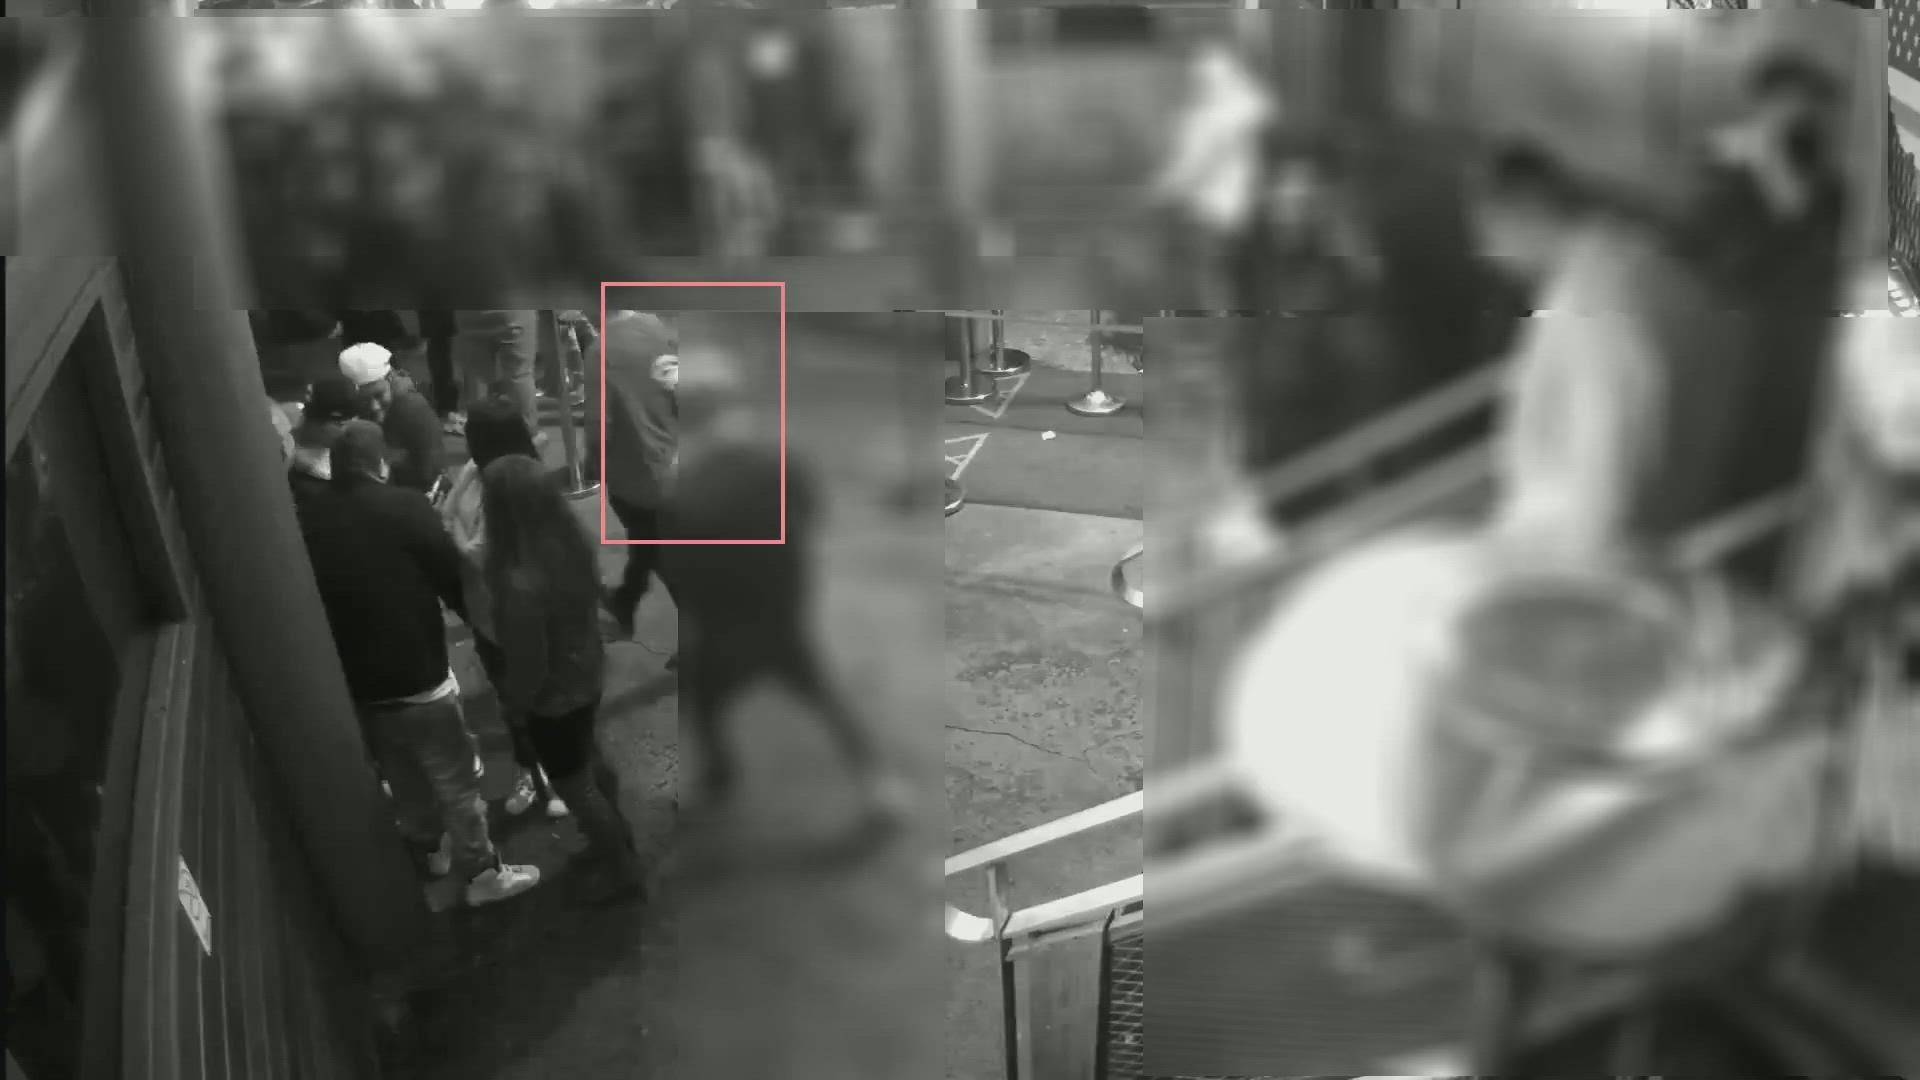 Atlanta police say this video shows a suspect they are seeking for the shooting of a couple in Buckhead on January 22, 2022.